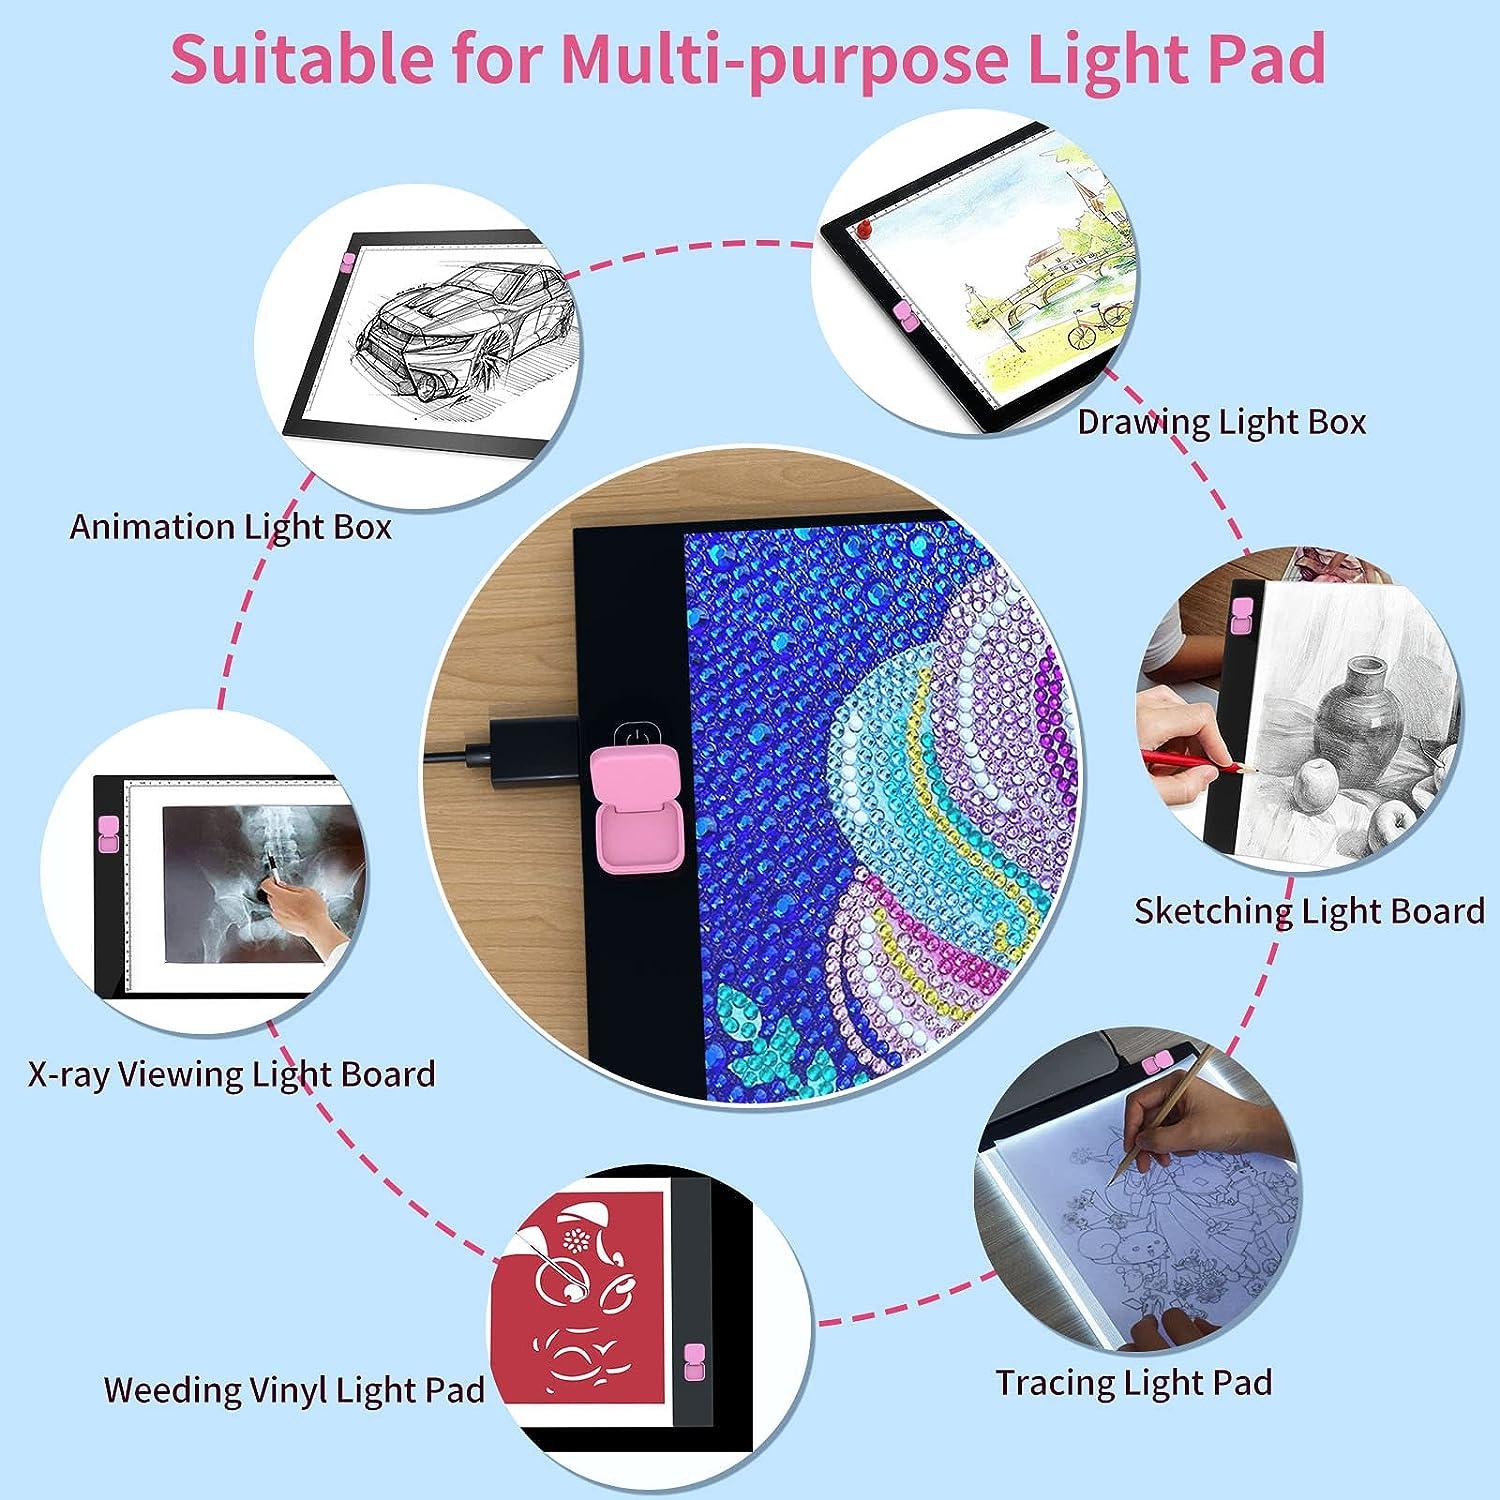 Diamond Painting Product Review - A4 Light Pad on  